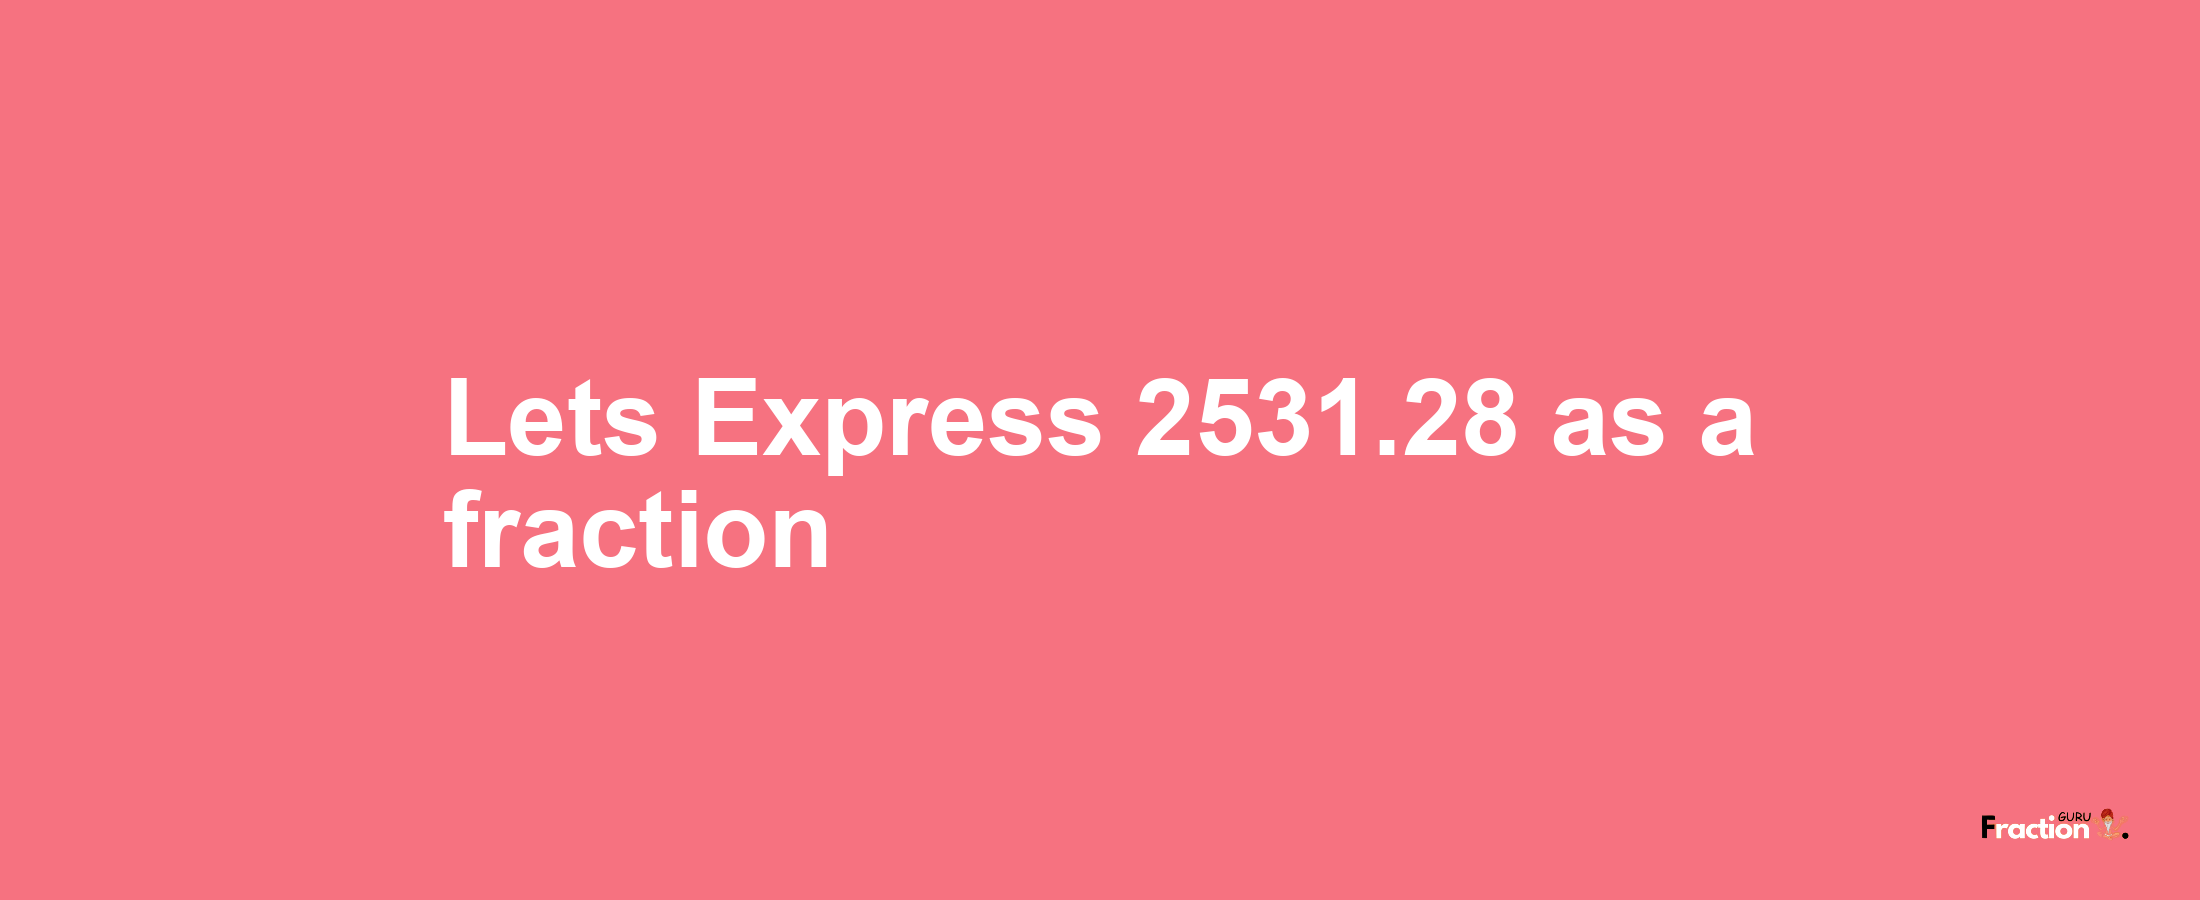 Lets Express 2531.28 as afraction